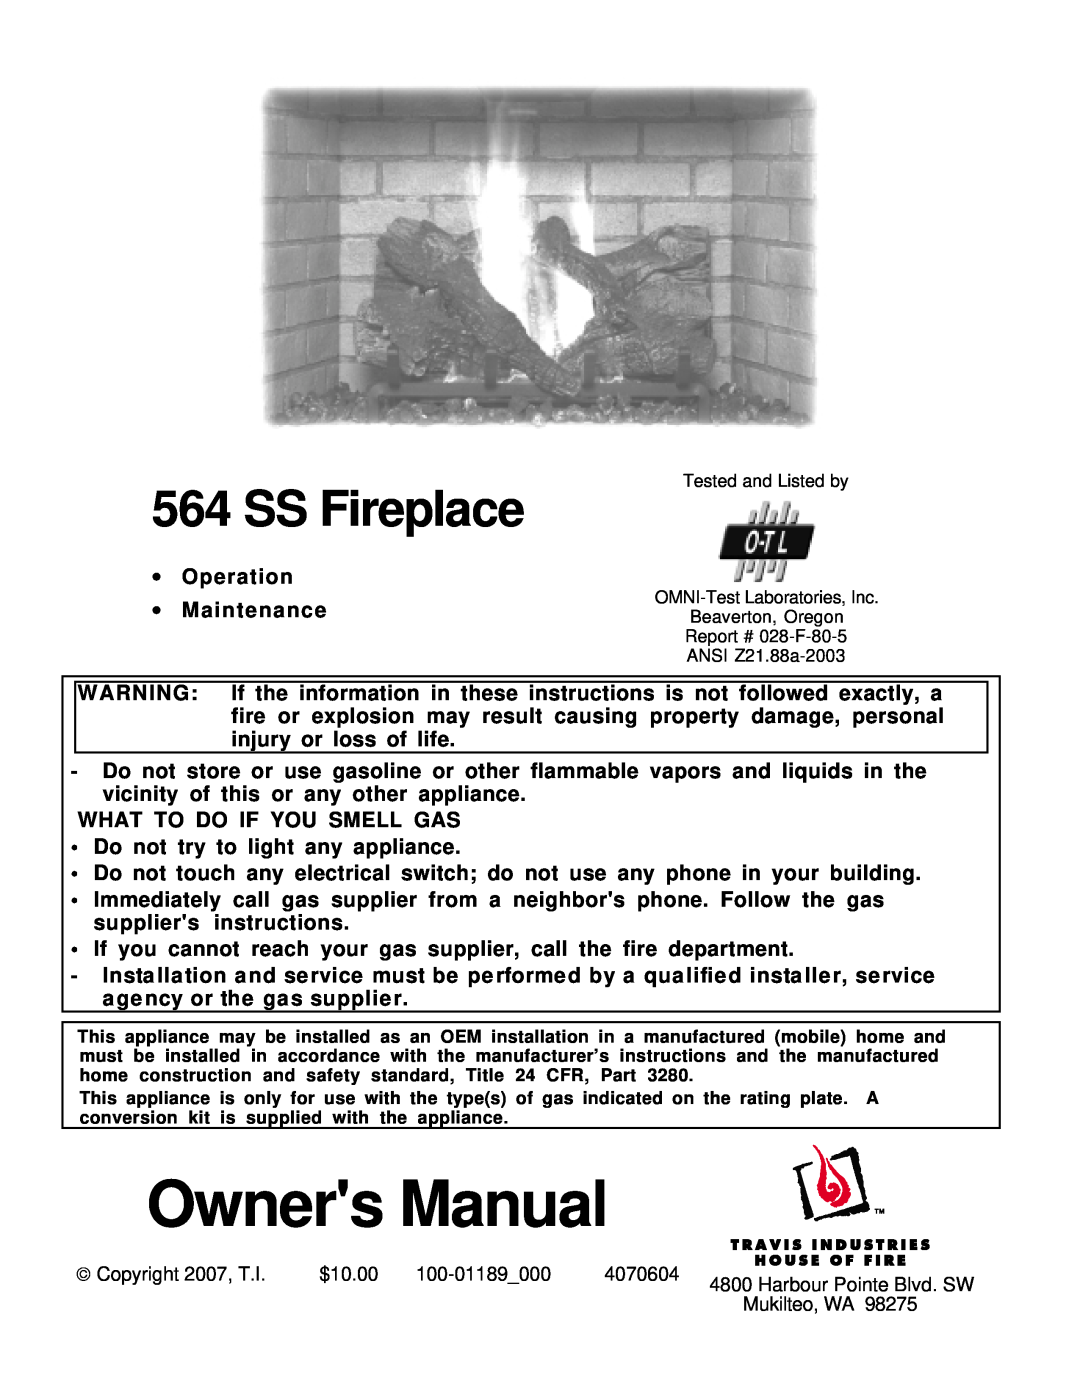 Omnitron Systems Technology 564 SS owner manual SS Fireplace 